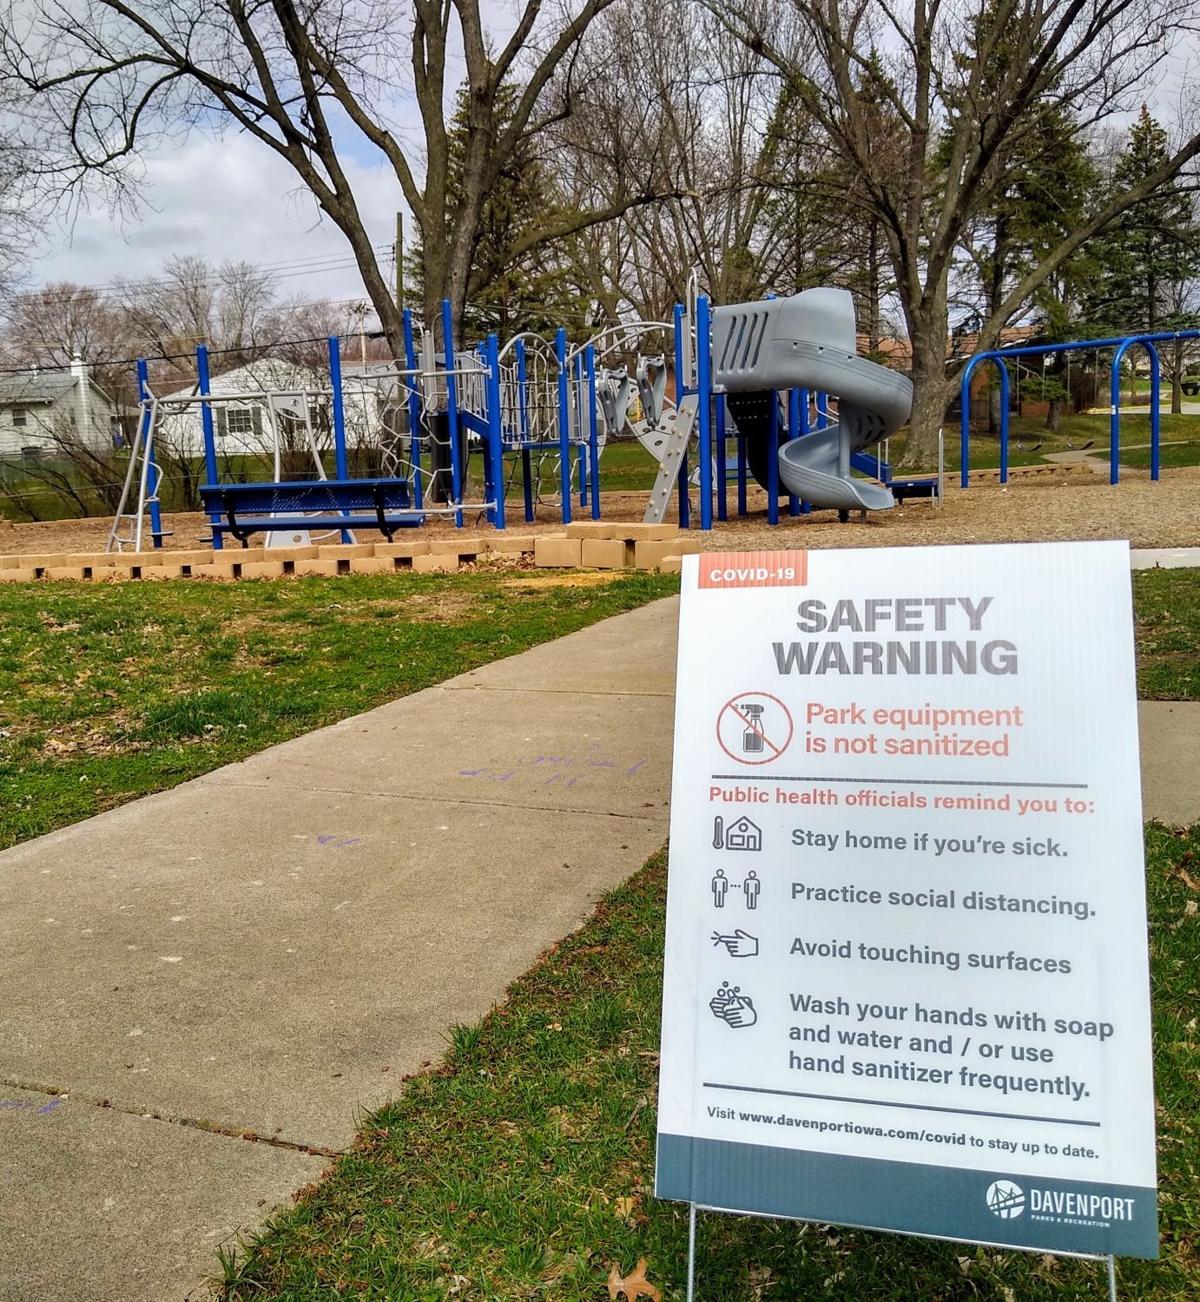 Enjoy nature, but stay off Quad-Cities playgrounds and pickleball